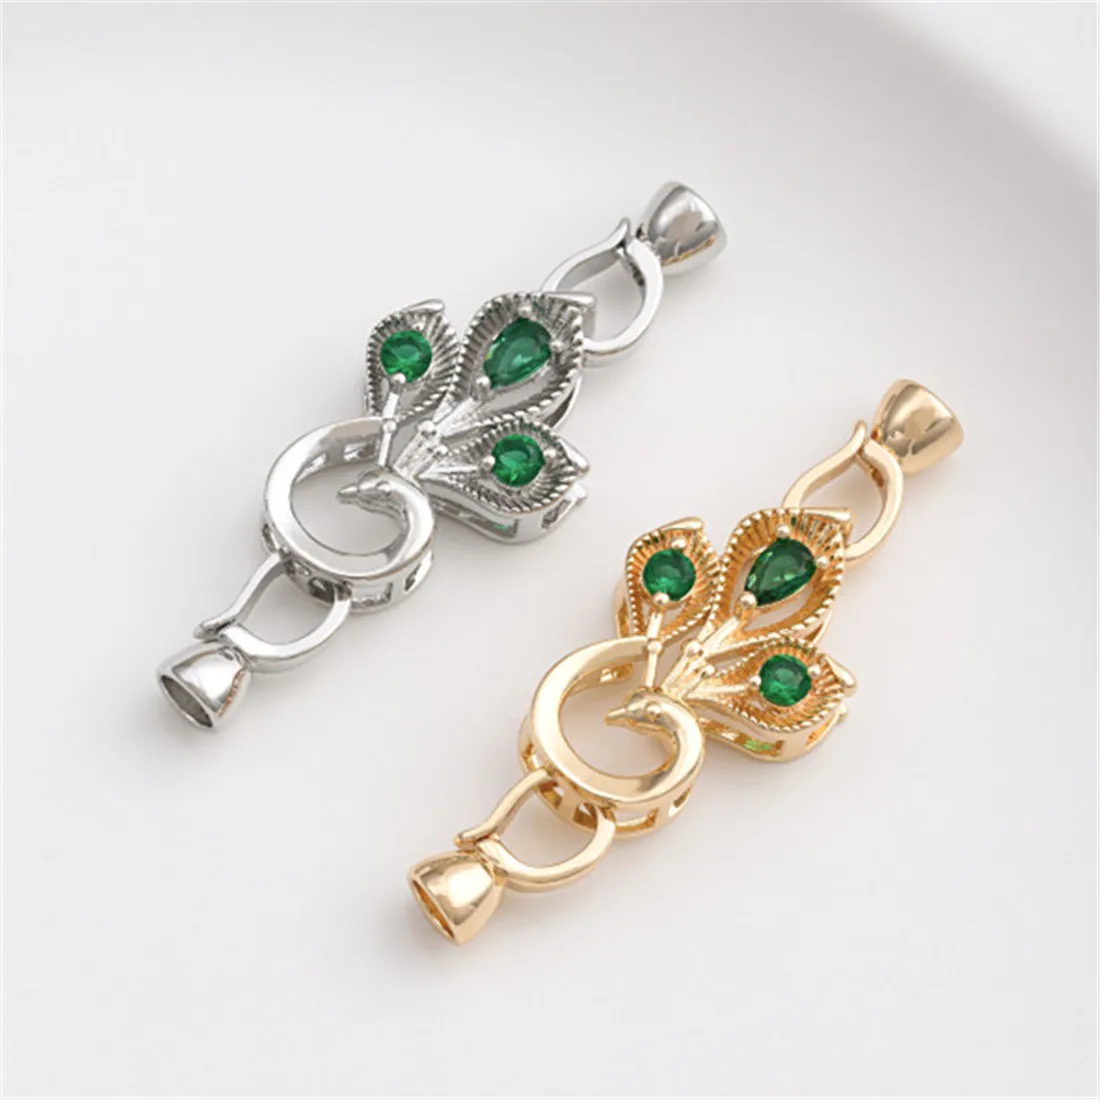 14K Gold Inlaid Green Zircon Peacock Pearl Buckle Handcrafted DIY Pearl Necklace Sweater Chain Connecting Buckle C007 hanging buckle 14k gold plated 18k gold zircon melon seed buckle diy necklace hanging buckle pendant buckle jewelry accessories